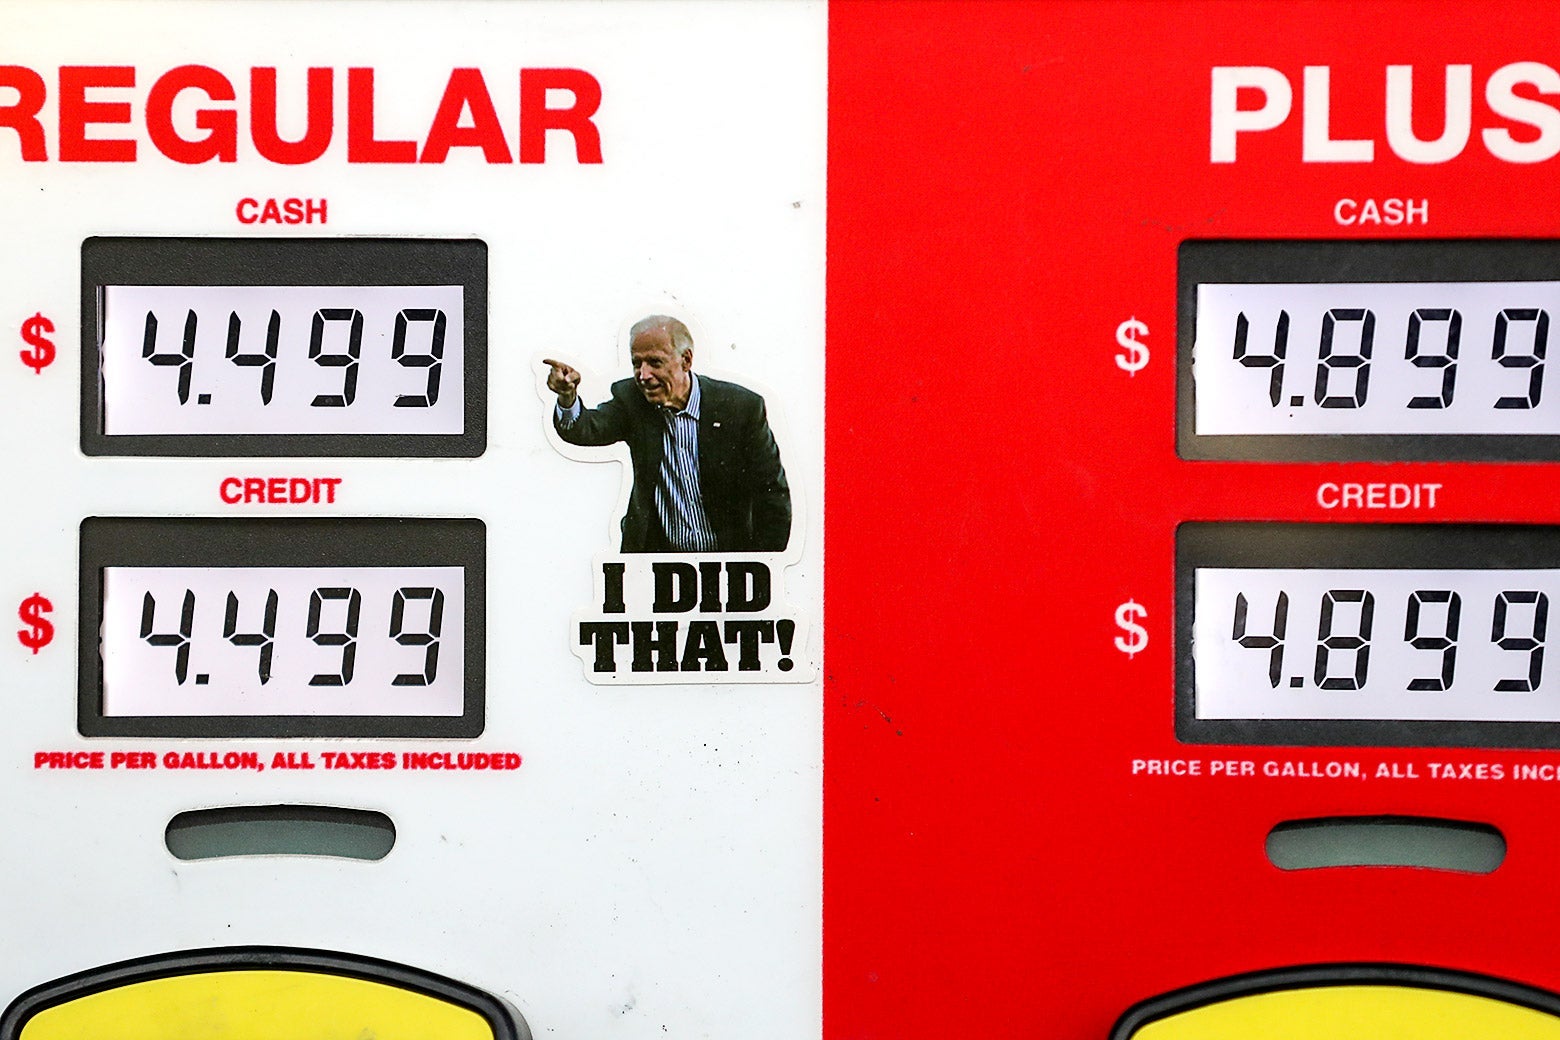 A gas pump where the price is shown as $4.499, with a Biden sticker pointing to it.